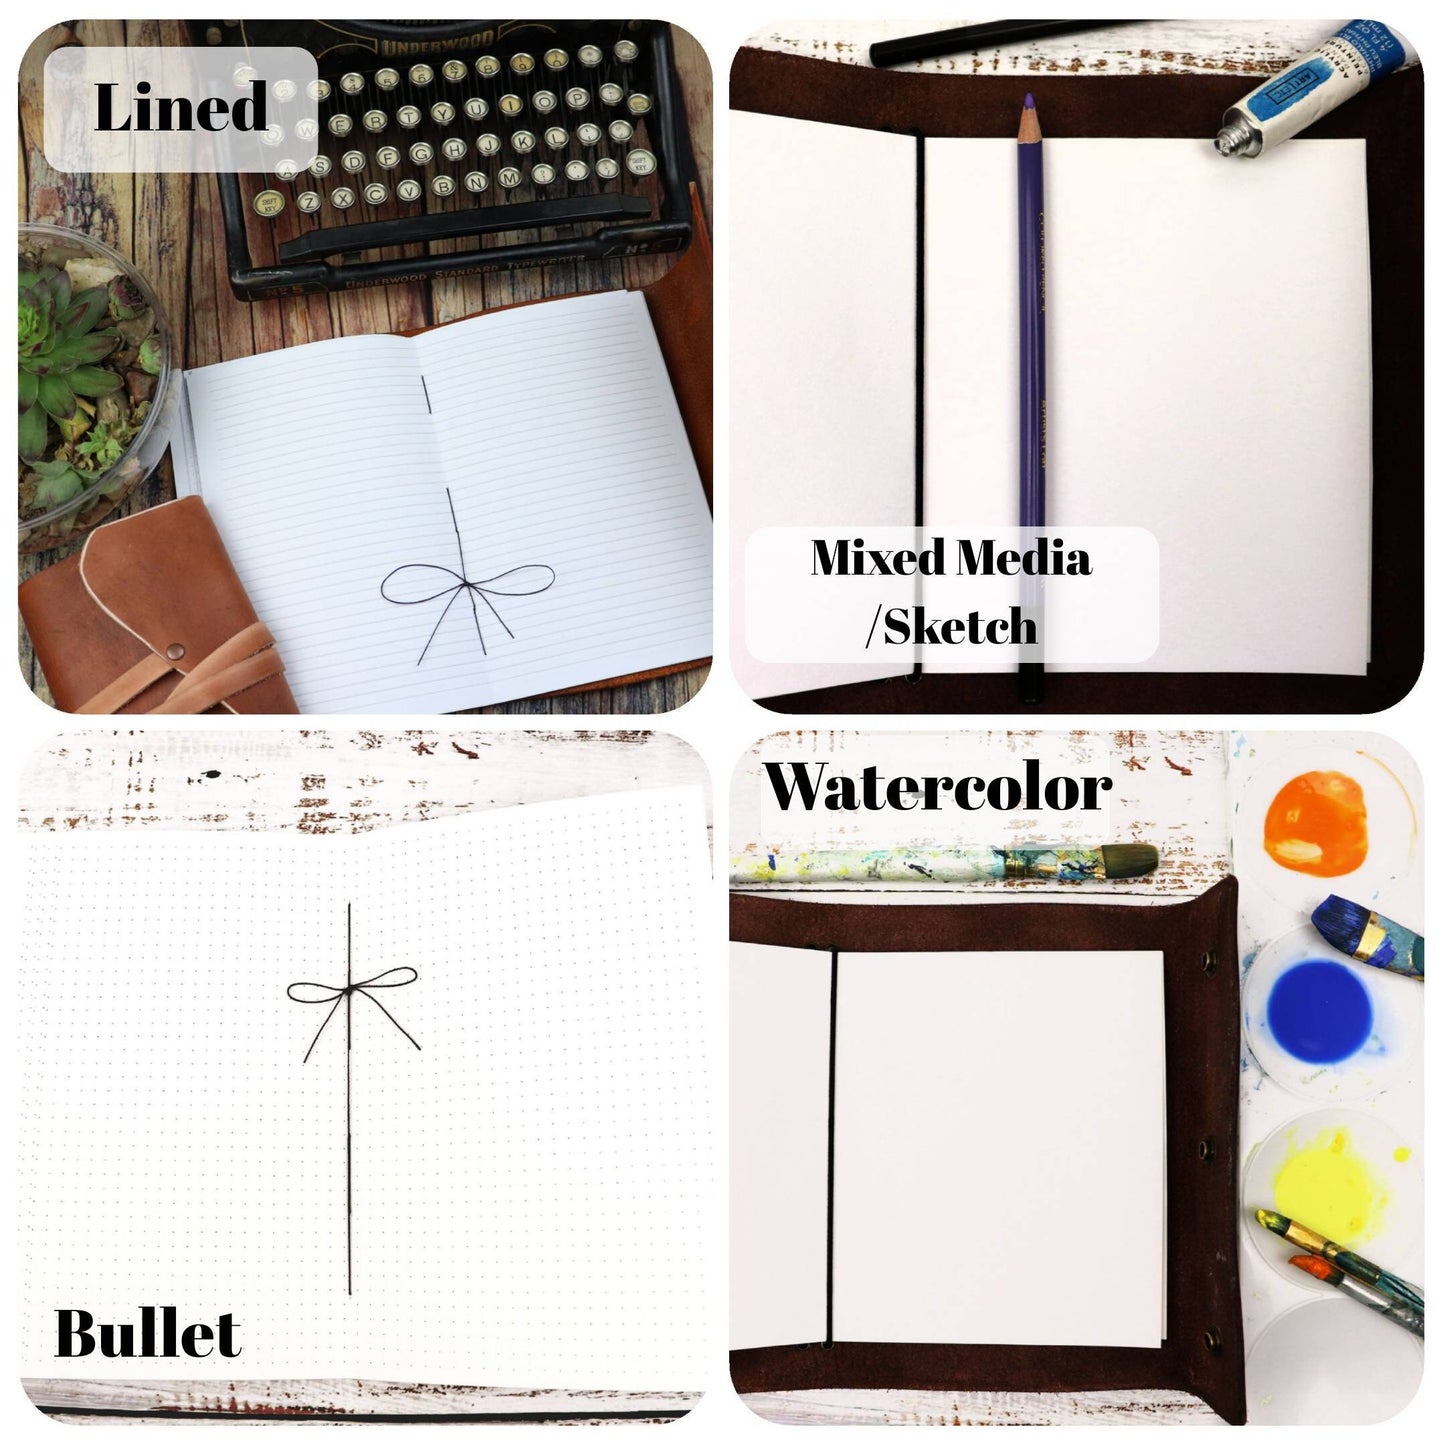 4 PACK Paper Booklets for Refillable Hank Belle Journals or Standalone; High Quality Mixed Media, Watercolor, Lined, Bullet Paper